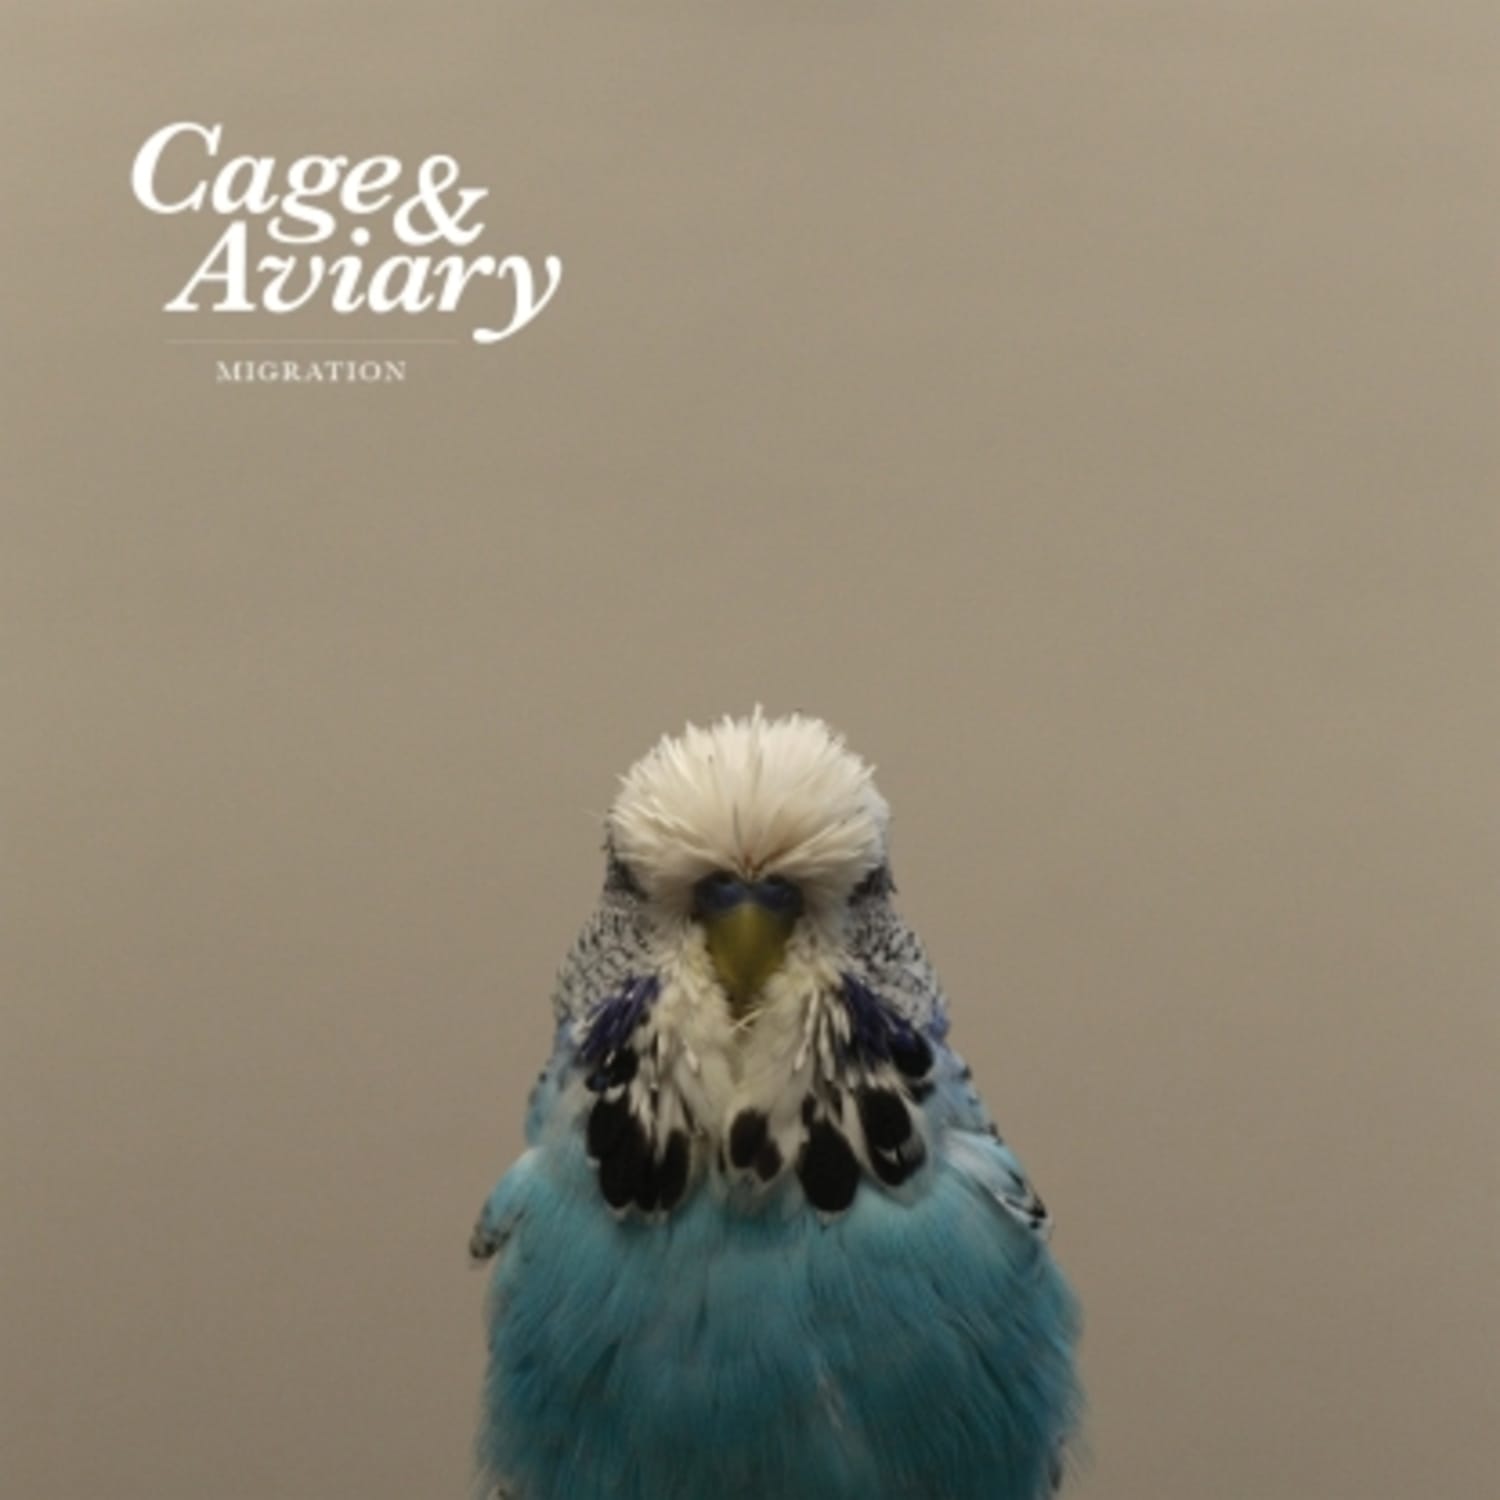 Cage & Aviary - MIGRATION 